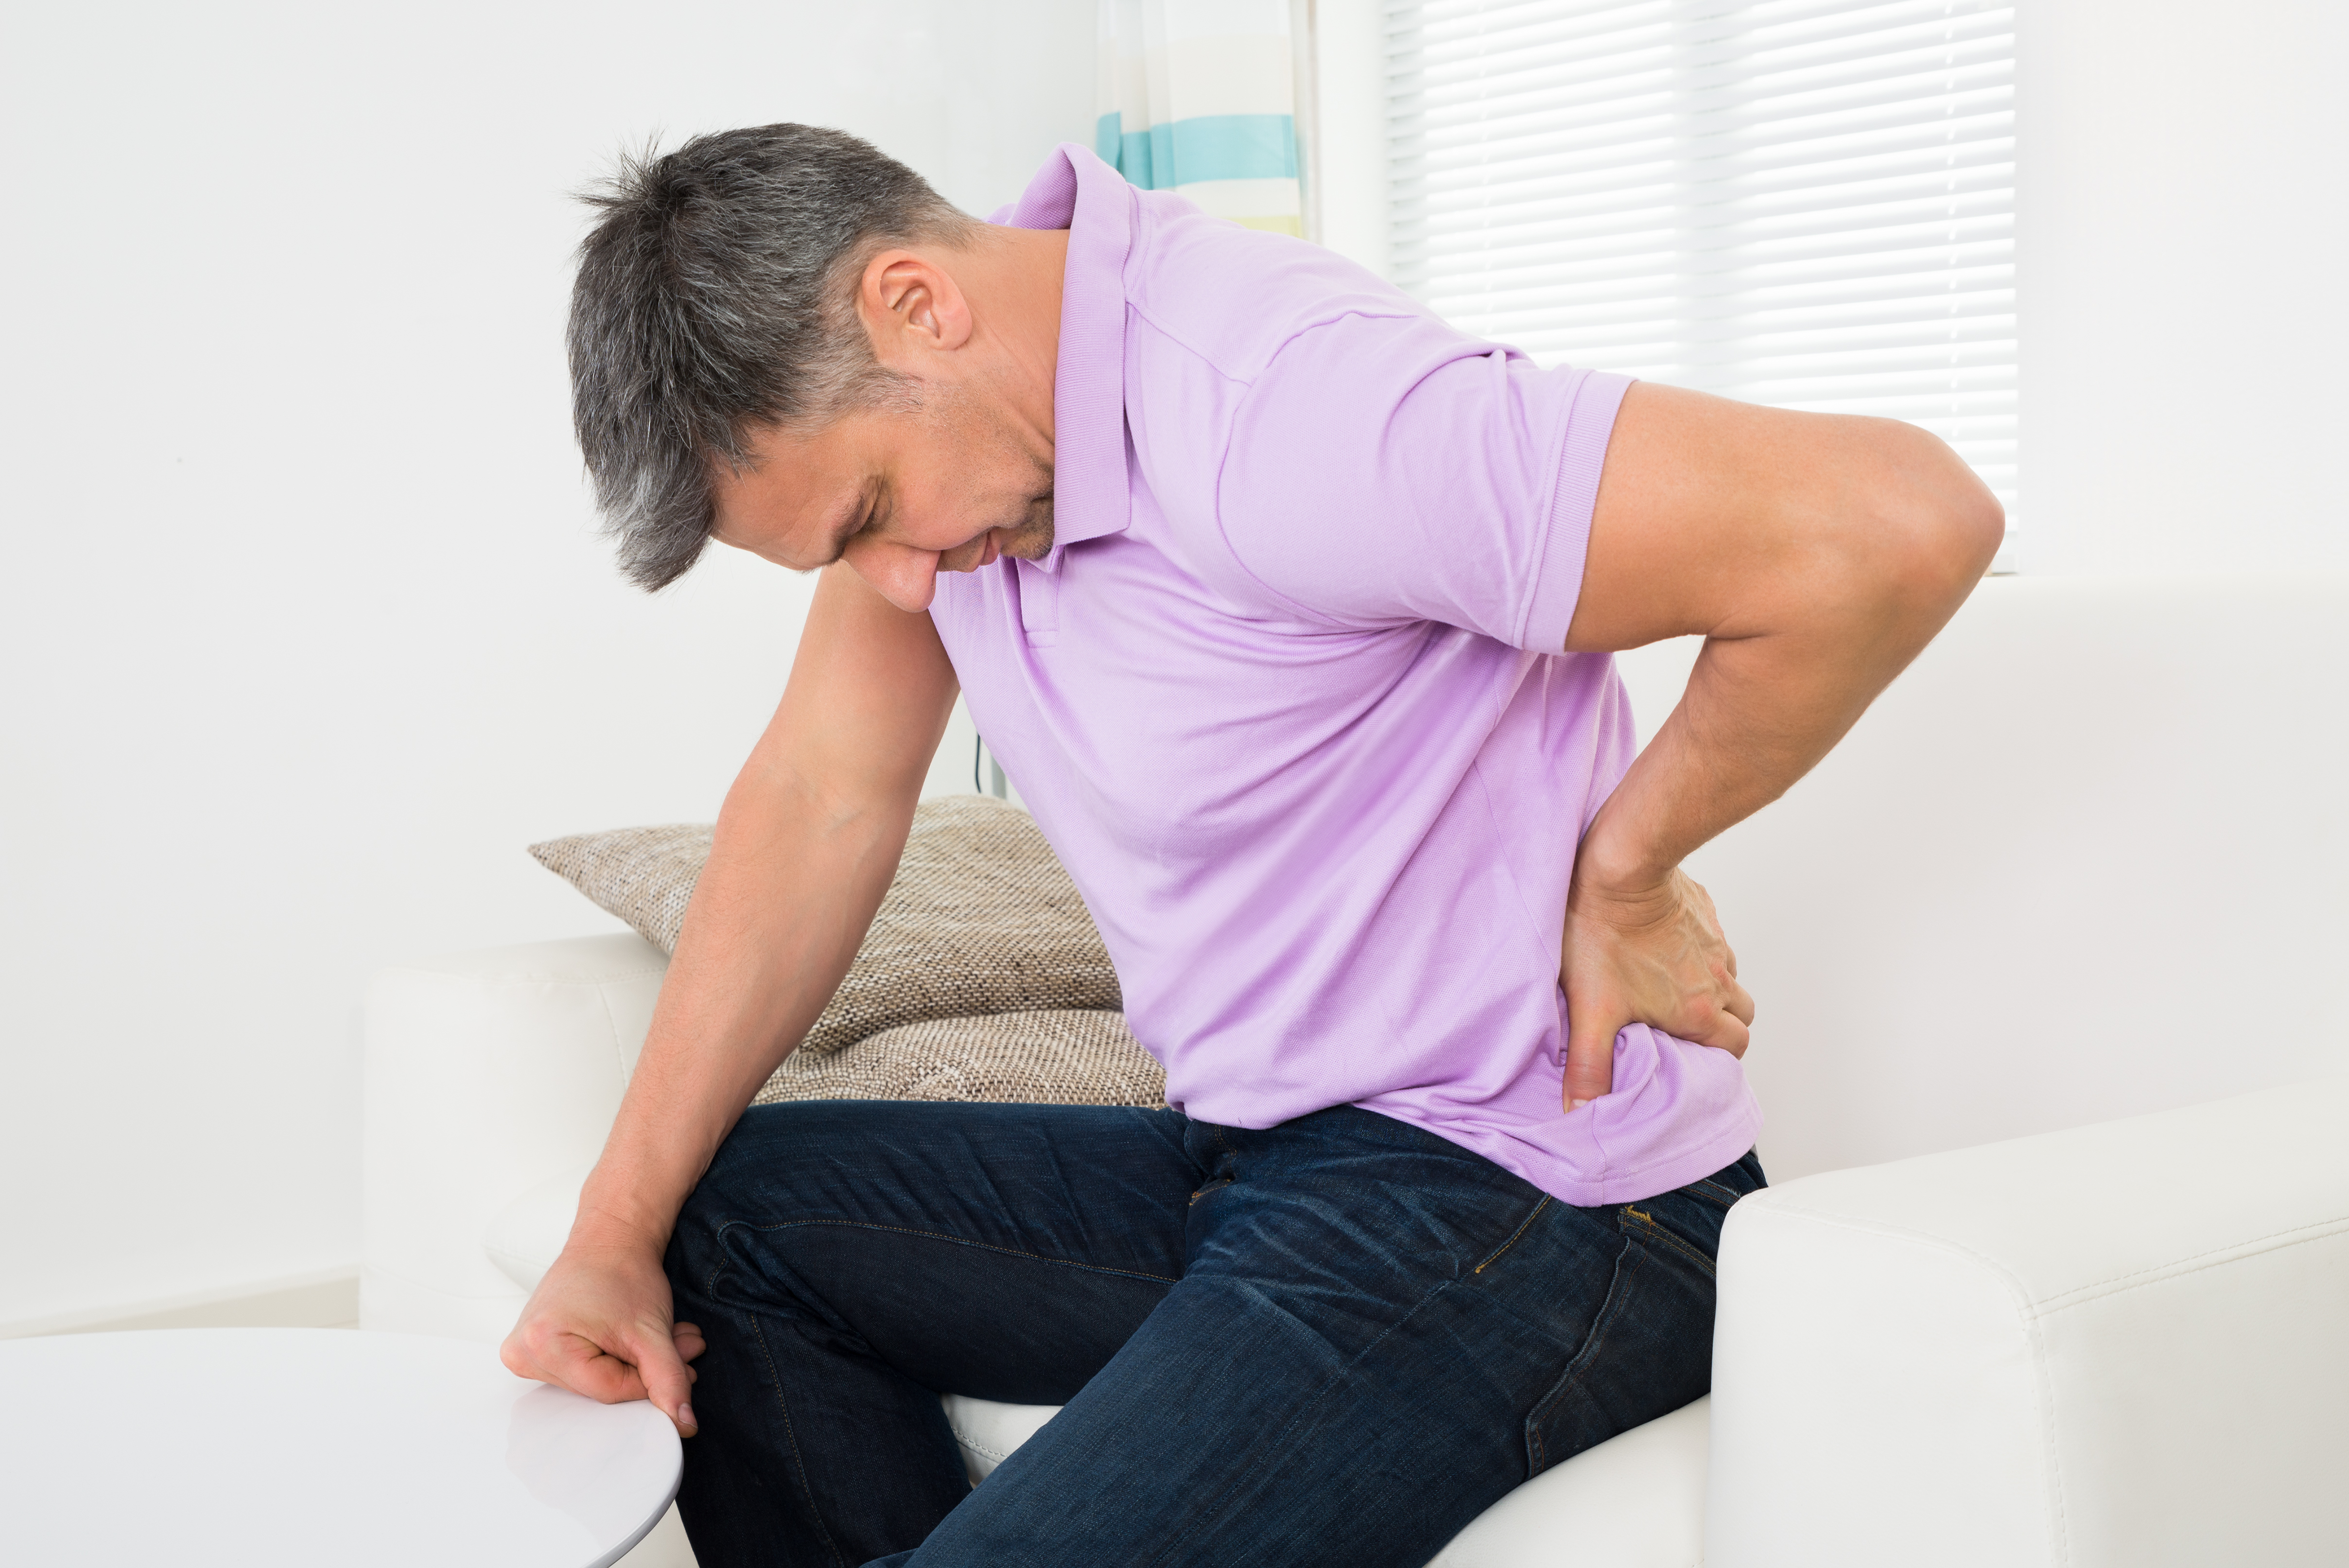 Man with low back pain